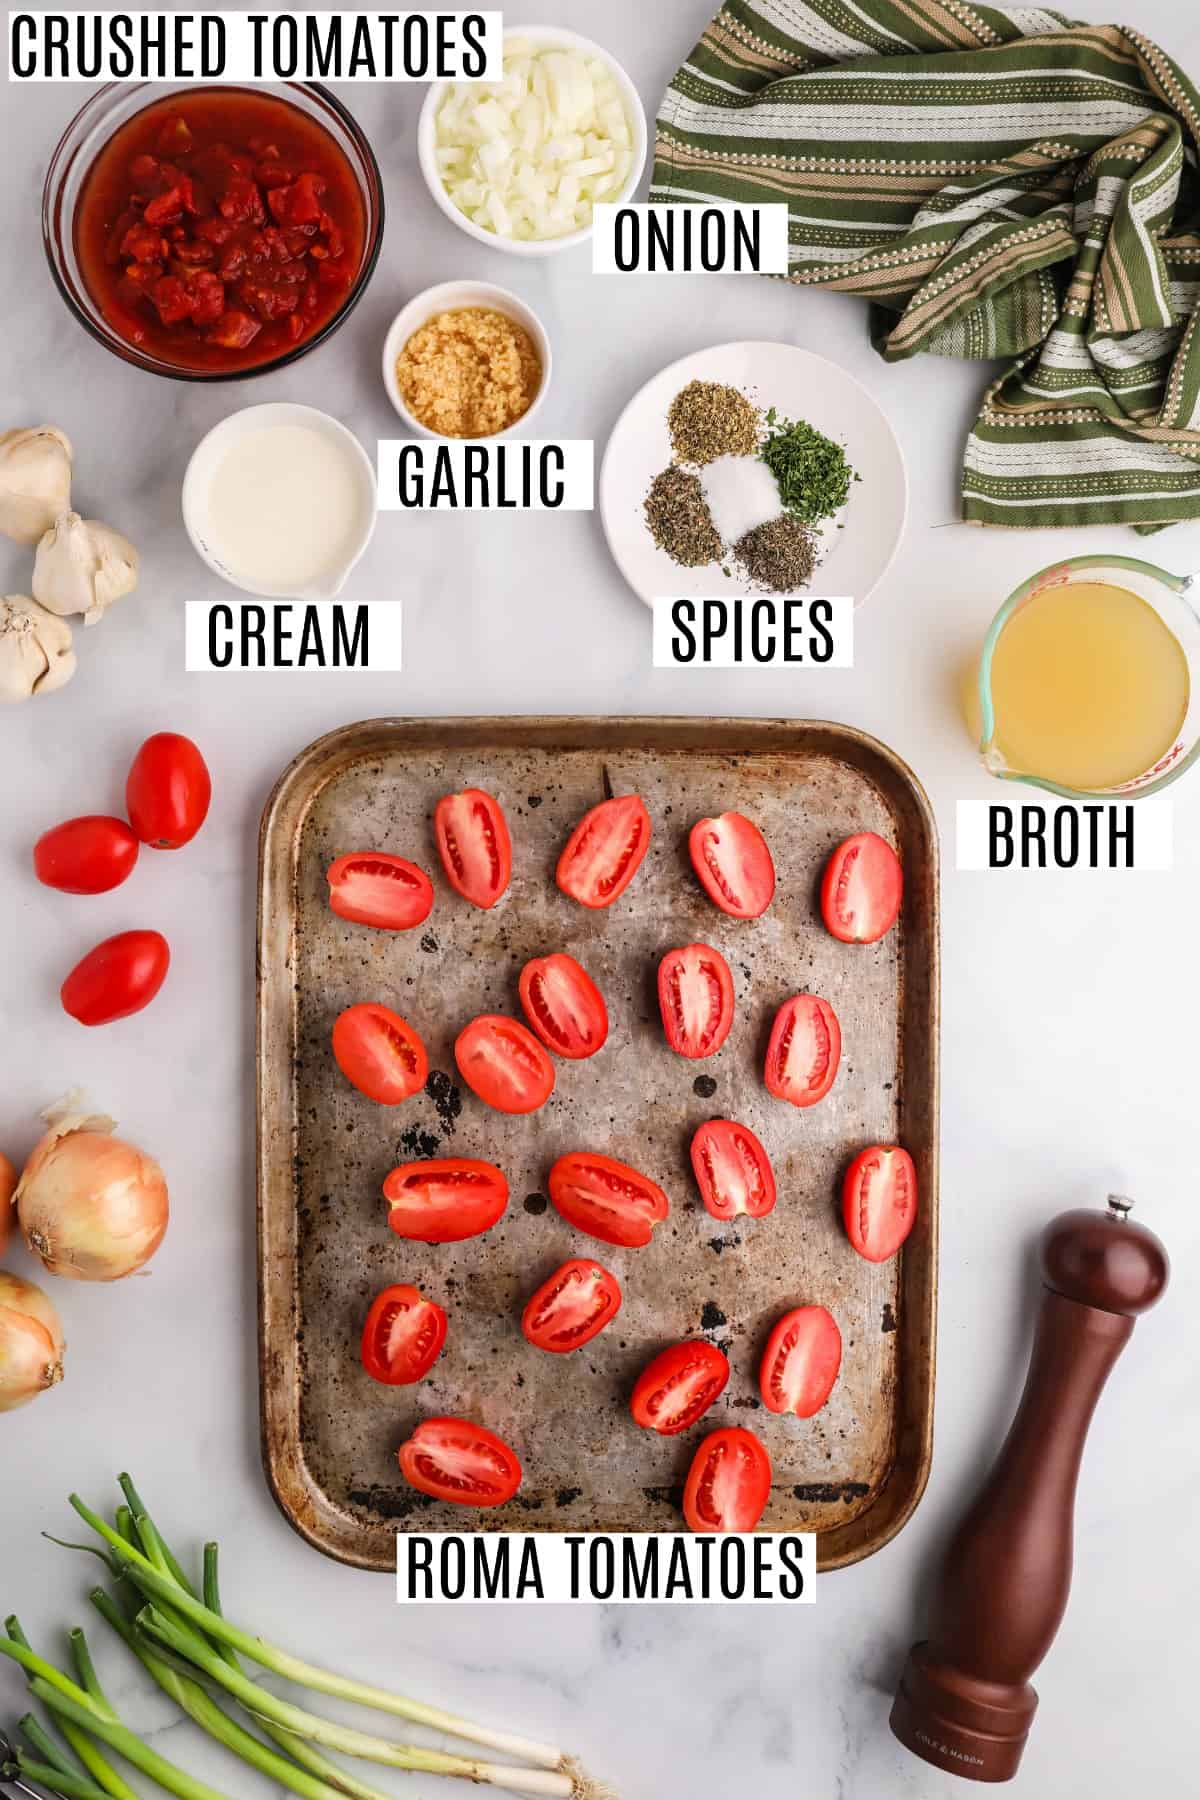 Ingredients needed to make roasted tomato soup, including fresh tomatoes, basil, and garlic.